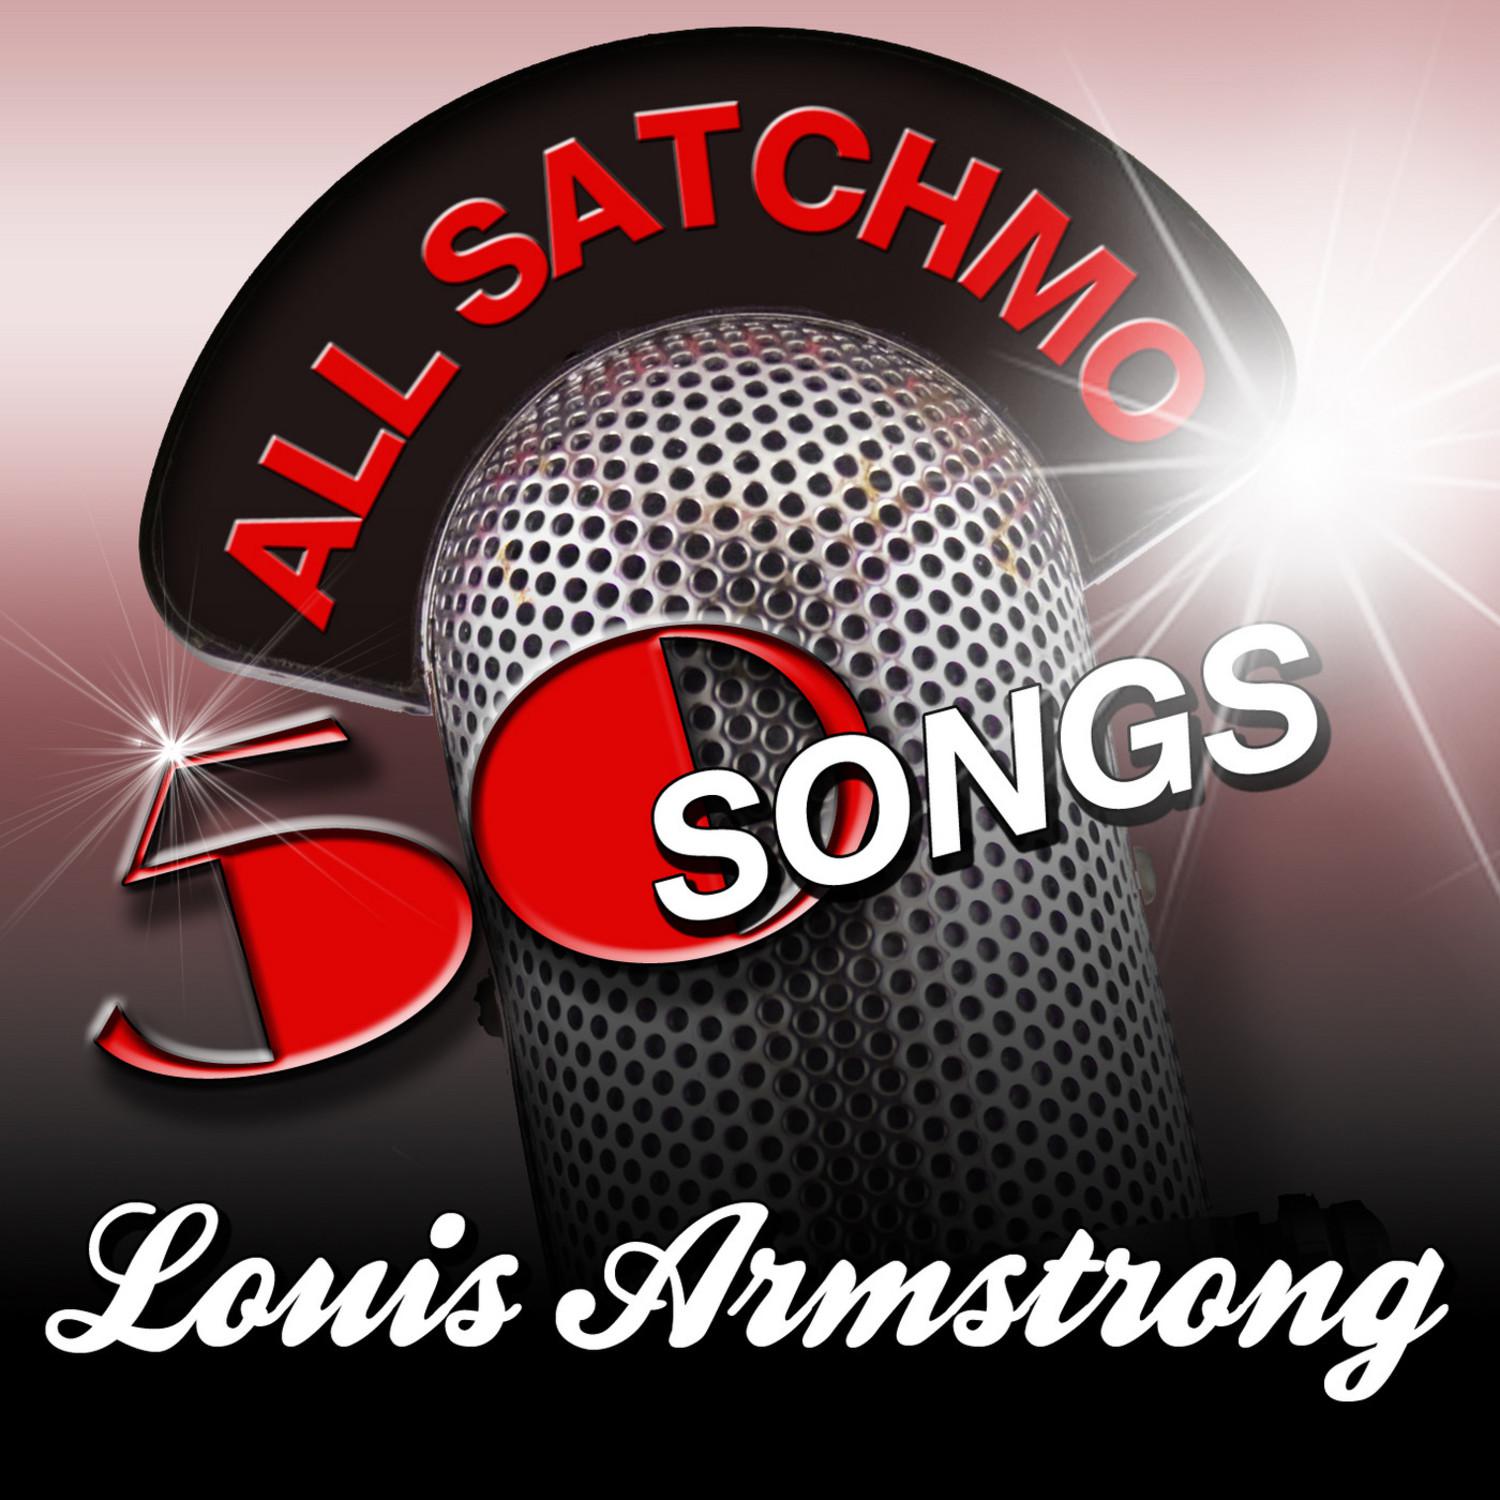 All Satchmo - 50 Songs